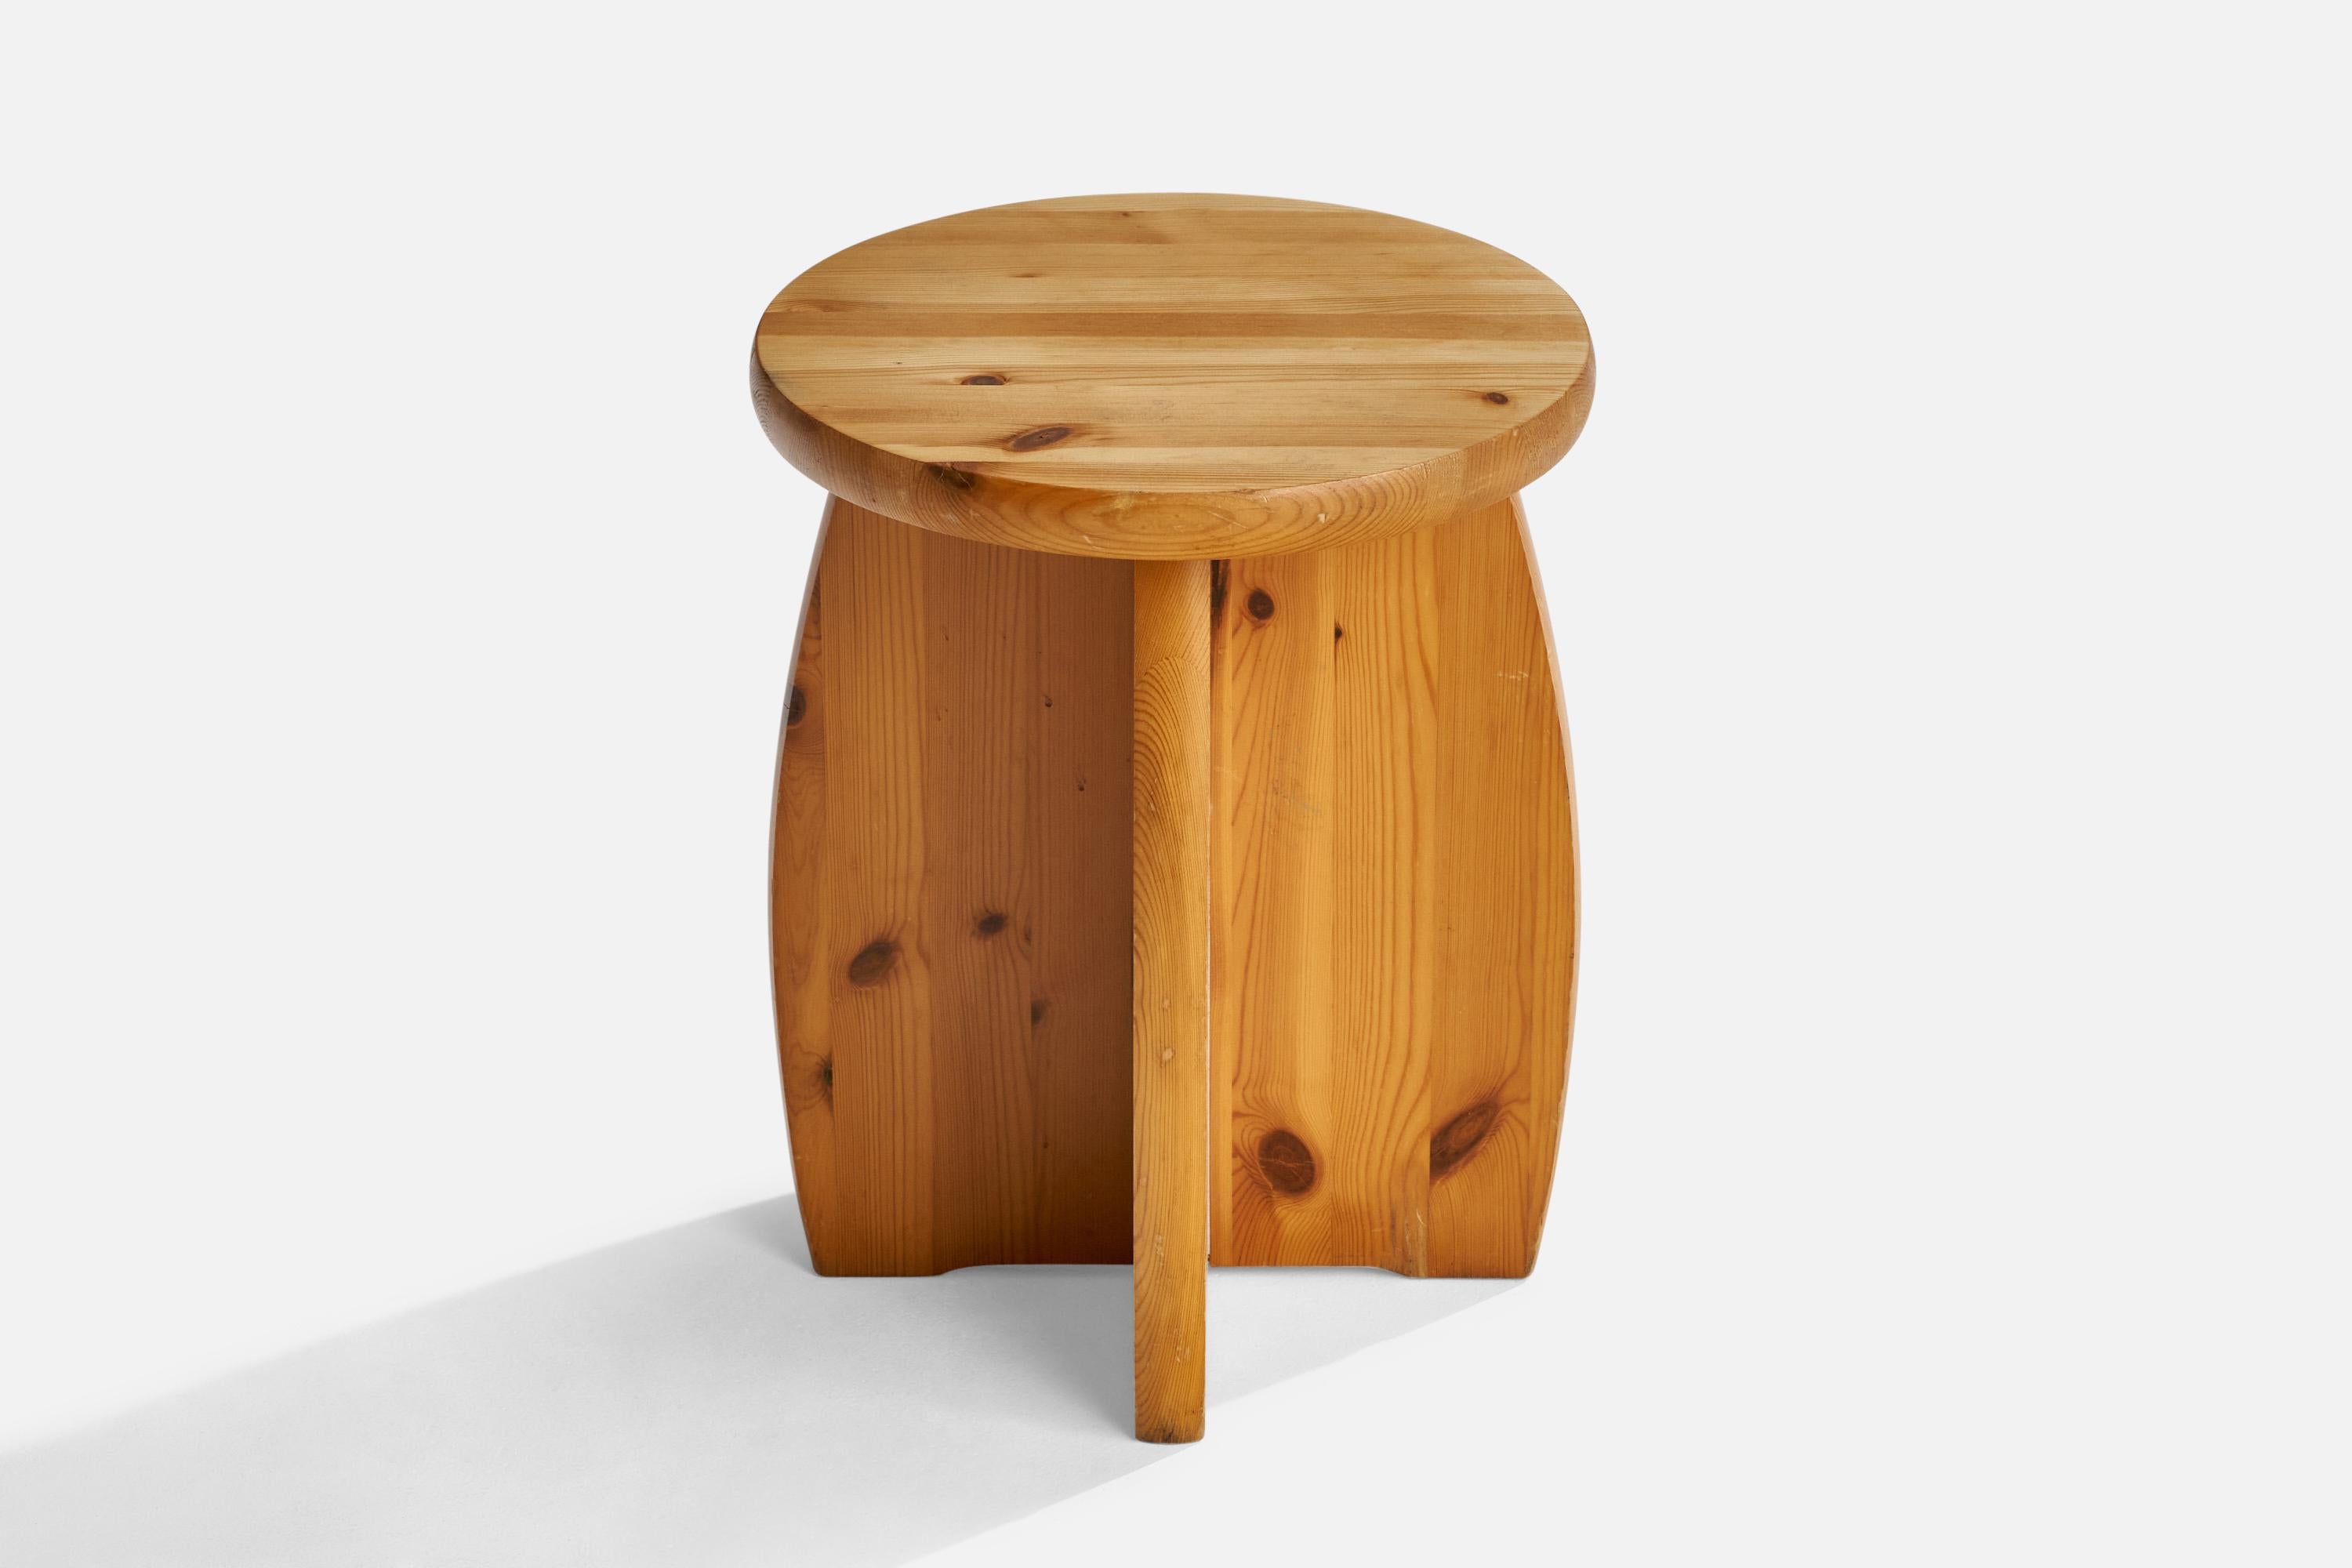 A pine stool designed and produced in Sweden, c. 1970s.

Seat height 17”.